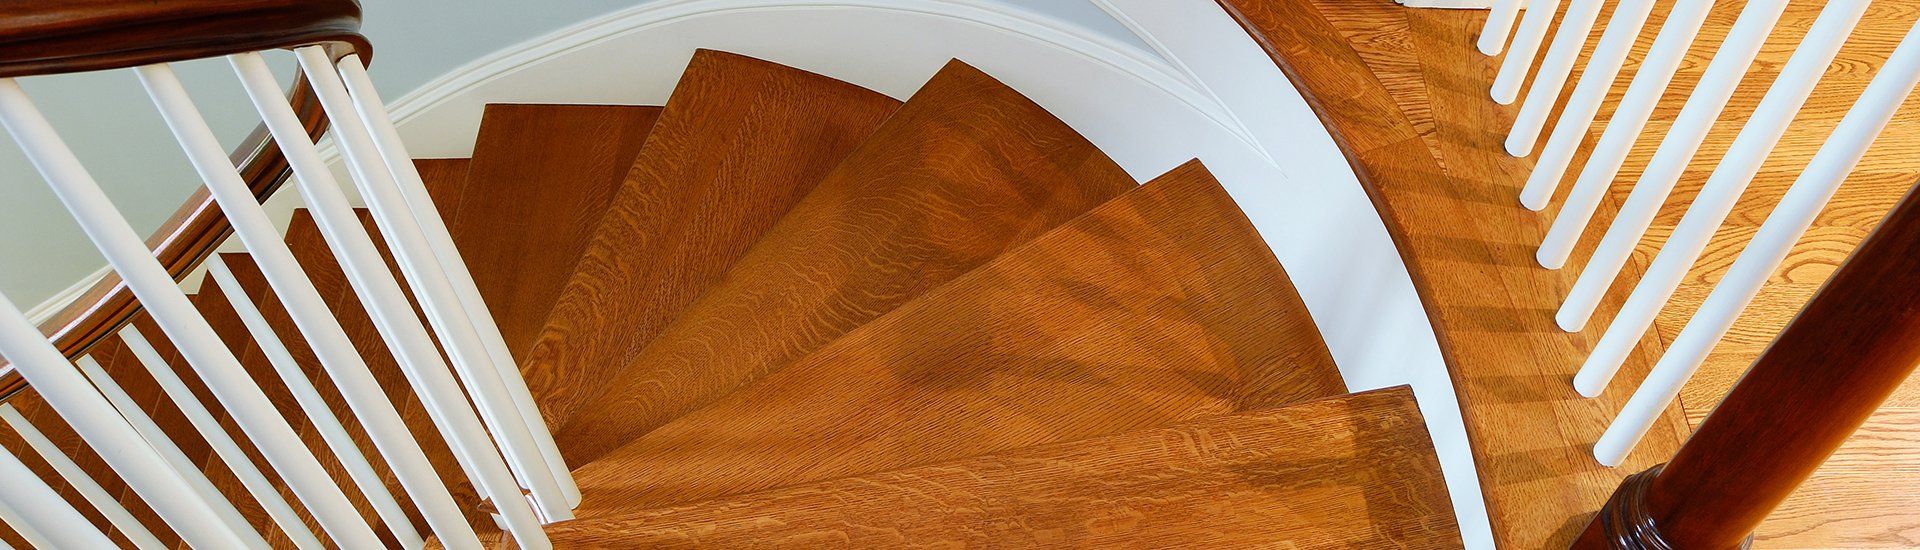 wooden flooring staircase 